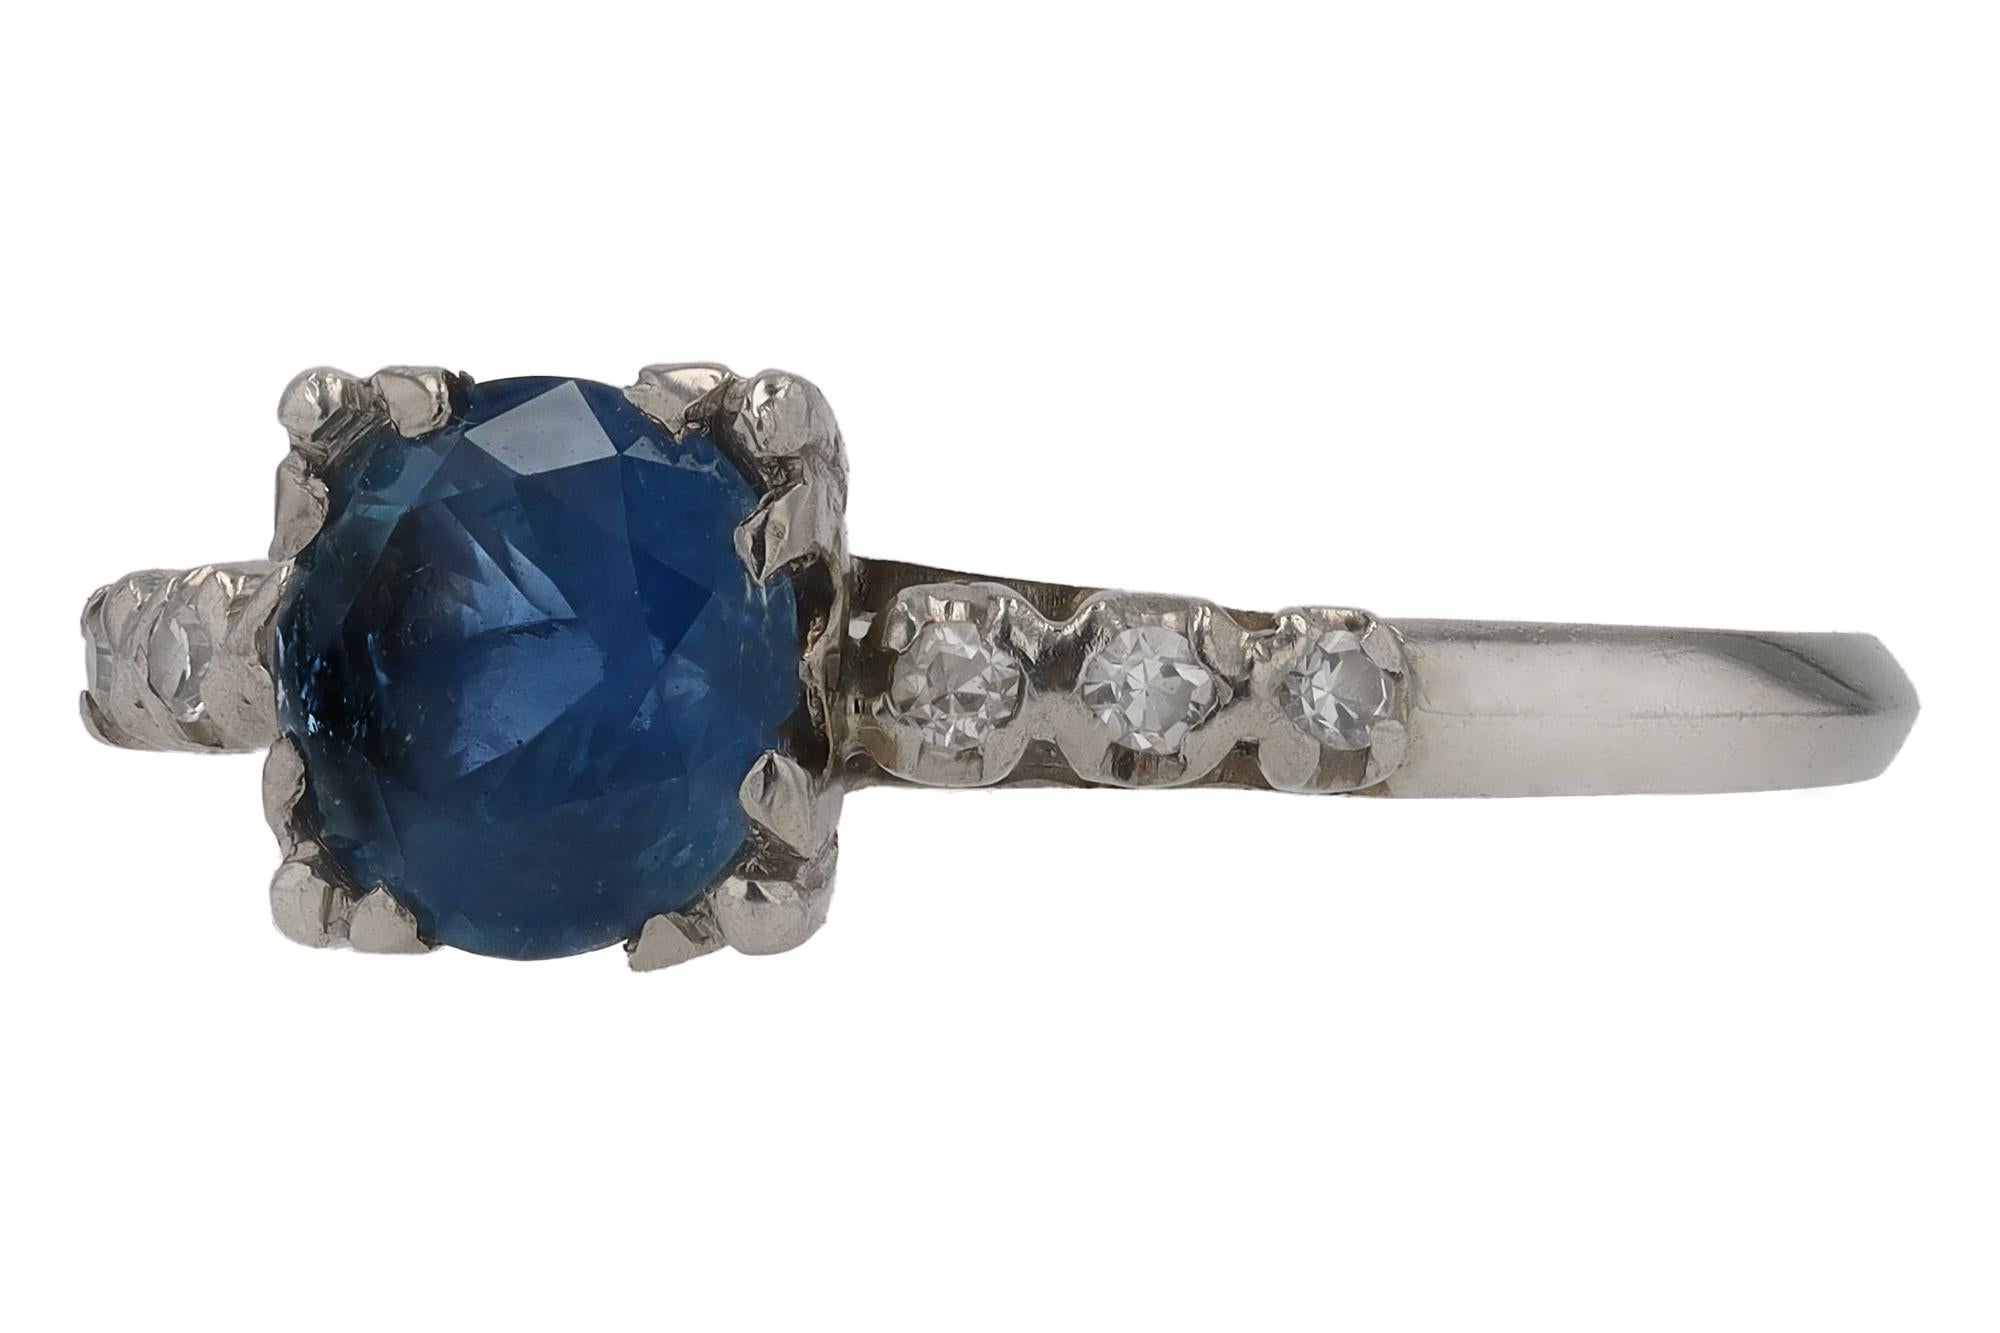 Antique Art Deco 1 Carat Blue Sapphire Solitaire Engagement Ring In Good Condition For Sale In Santa Barbara, CA